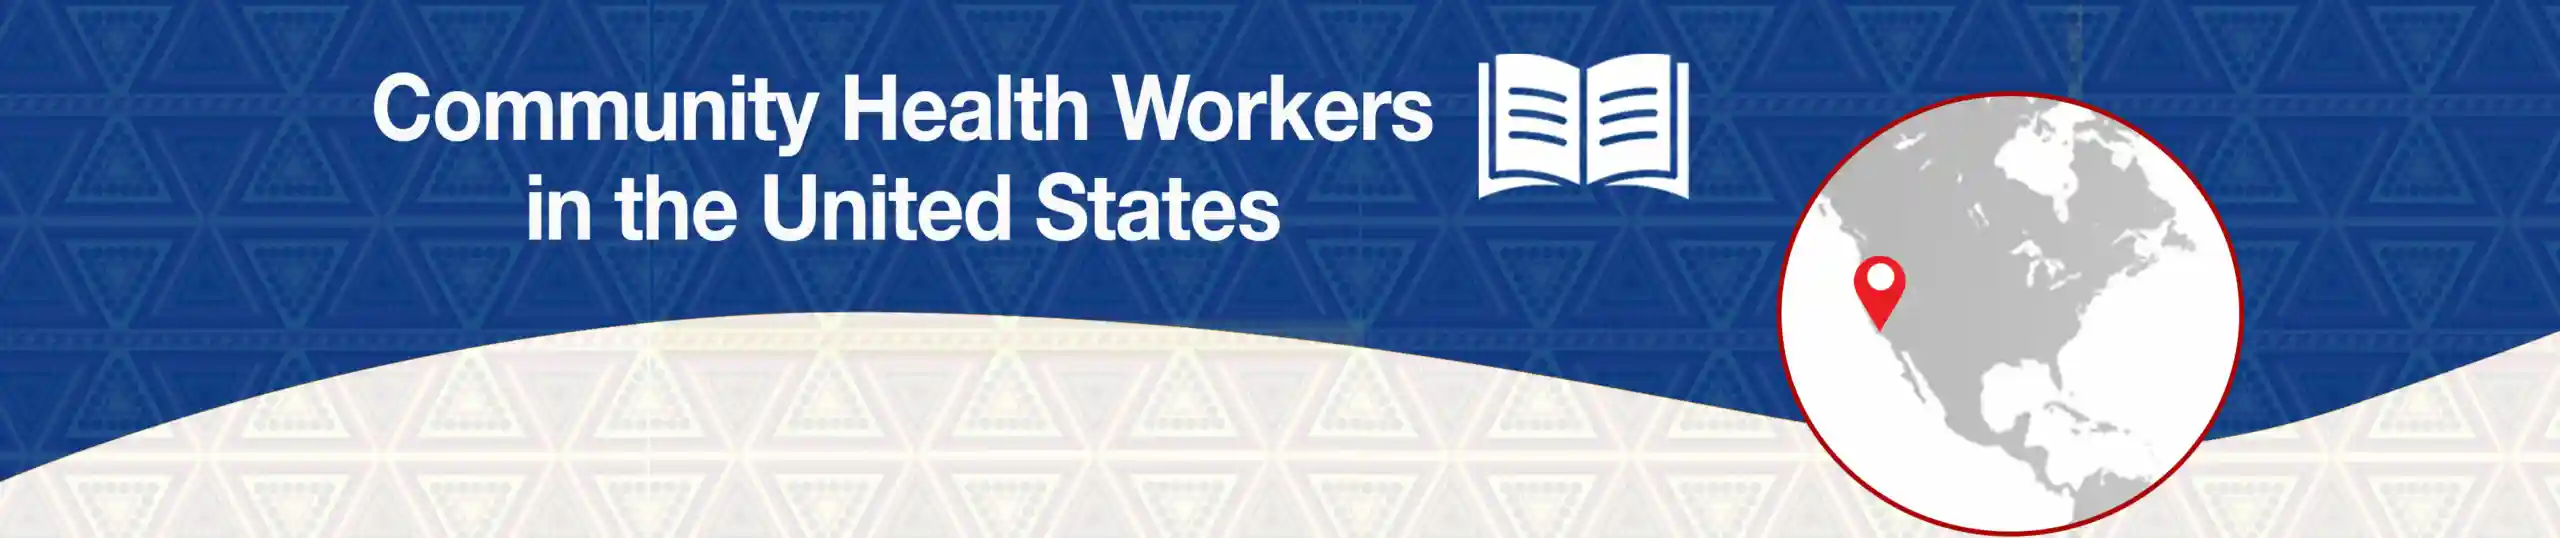 Community Health Workers in the United States